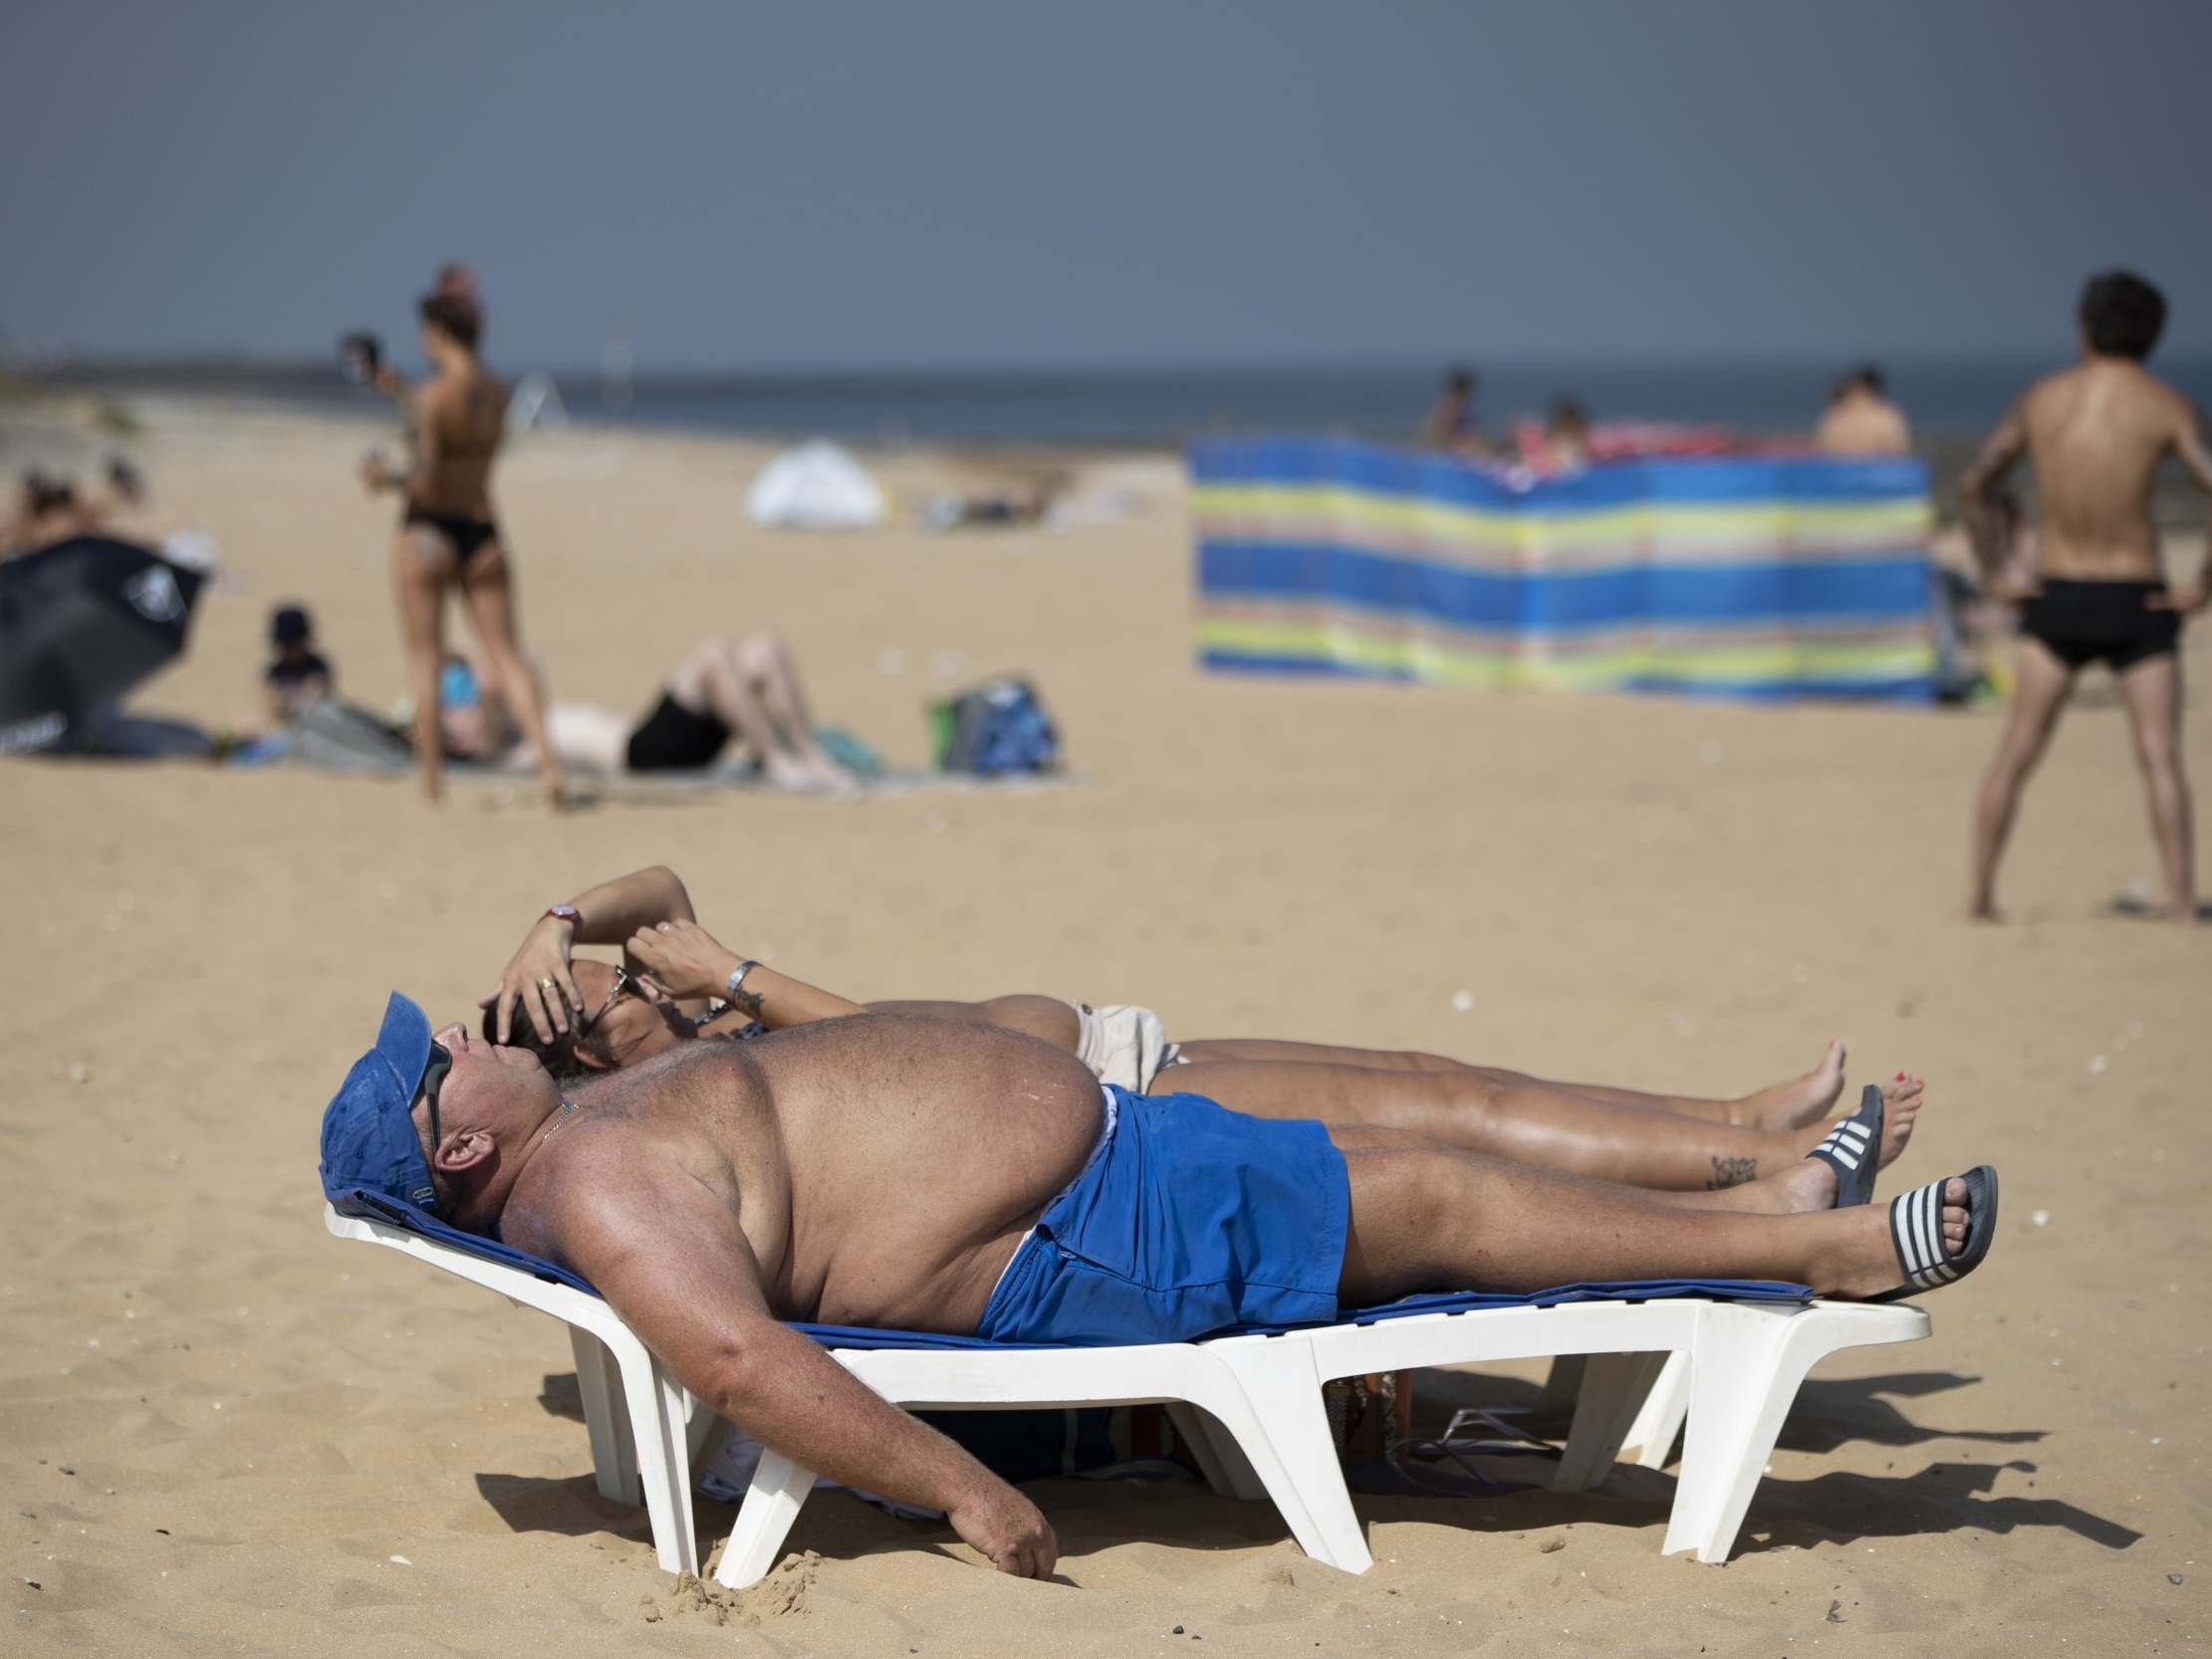 UK saw a heatwave last summer which was made 30 times more likely by climate change. Pictured is the beach in Margate